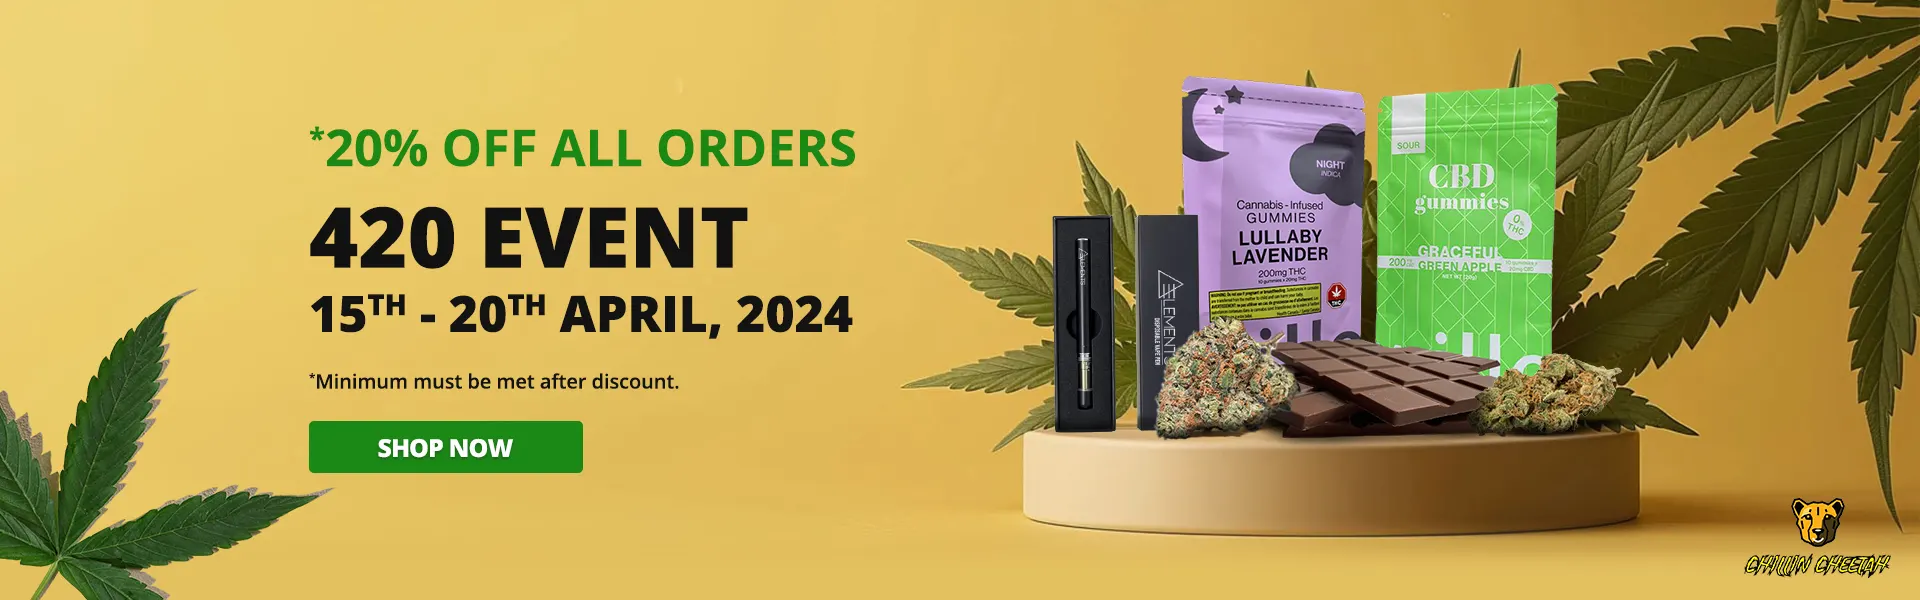 20% OFF - 420 Event